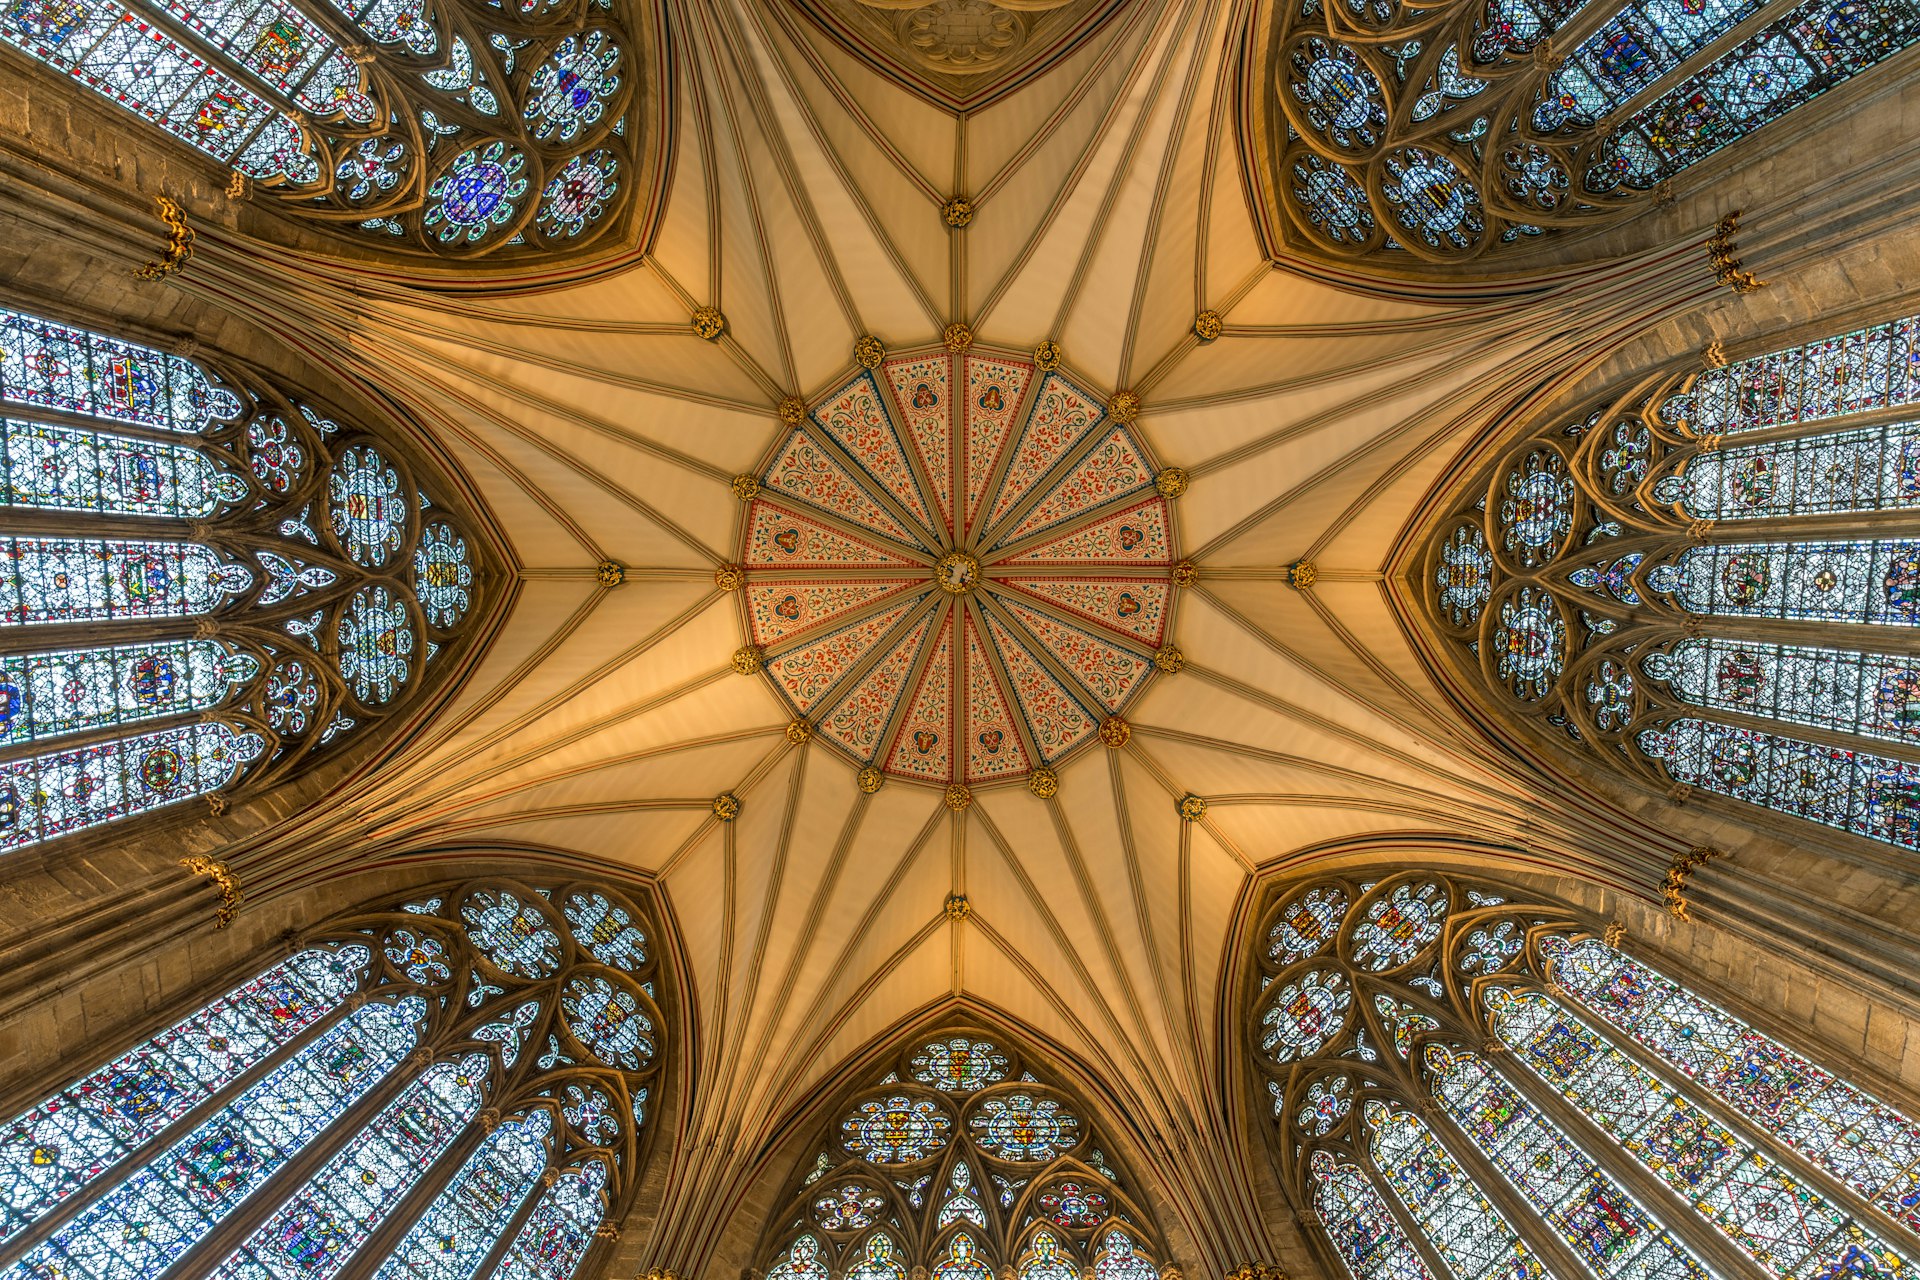 View of interior ceiling in the Chapter House within York Minster, on 22nd November 2015.